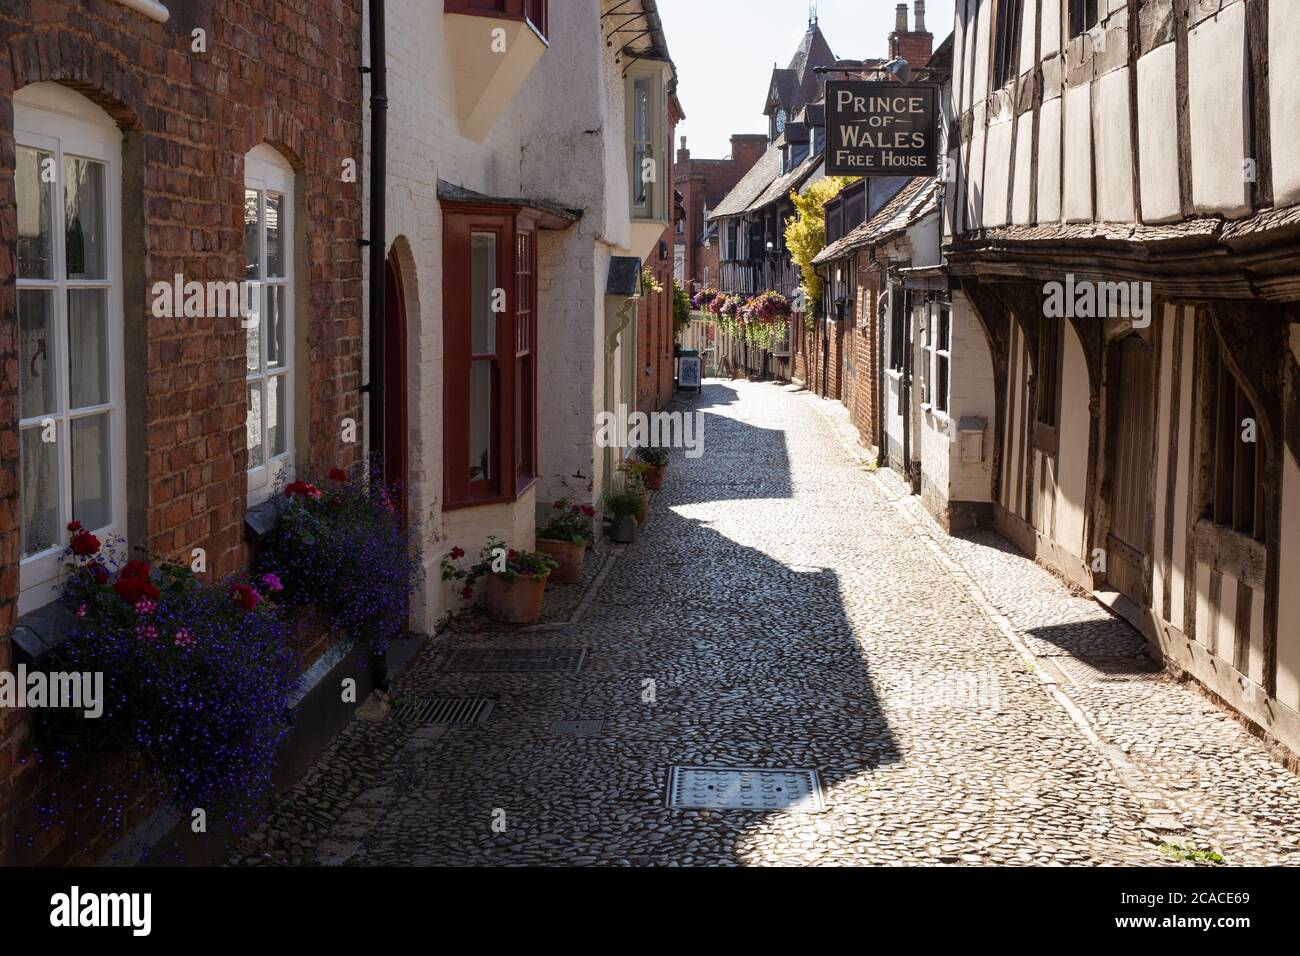 The town of Ledbury in Herefordshire, UK Stock Photo